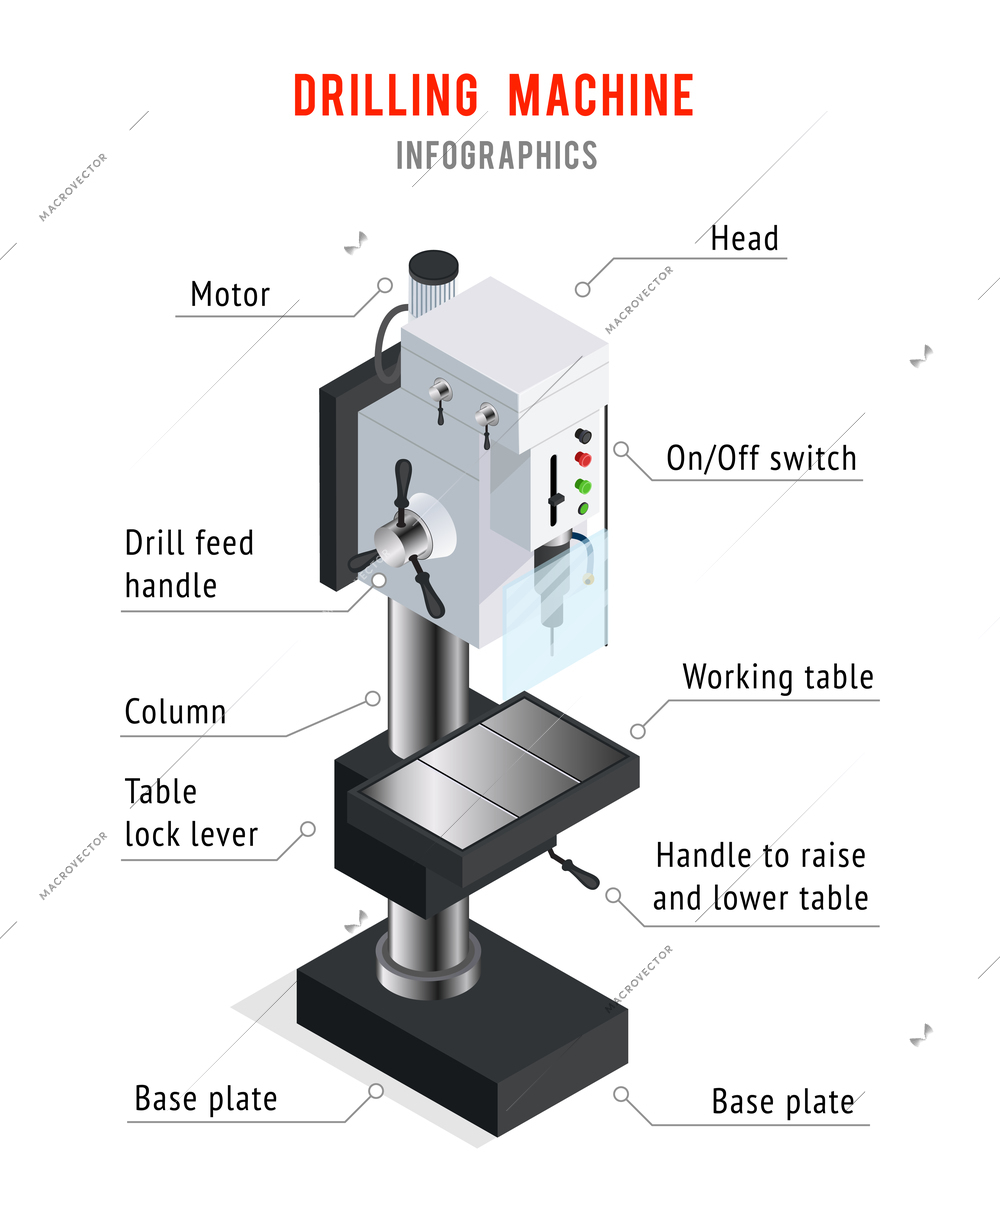 Drilling machine infographics with isometric image of driller and text descriptions for appropriate nuts and bolts vector illustration